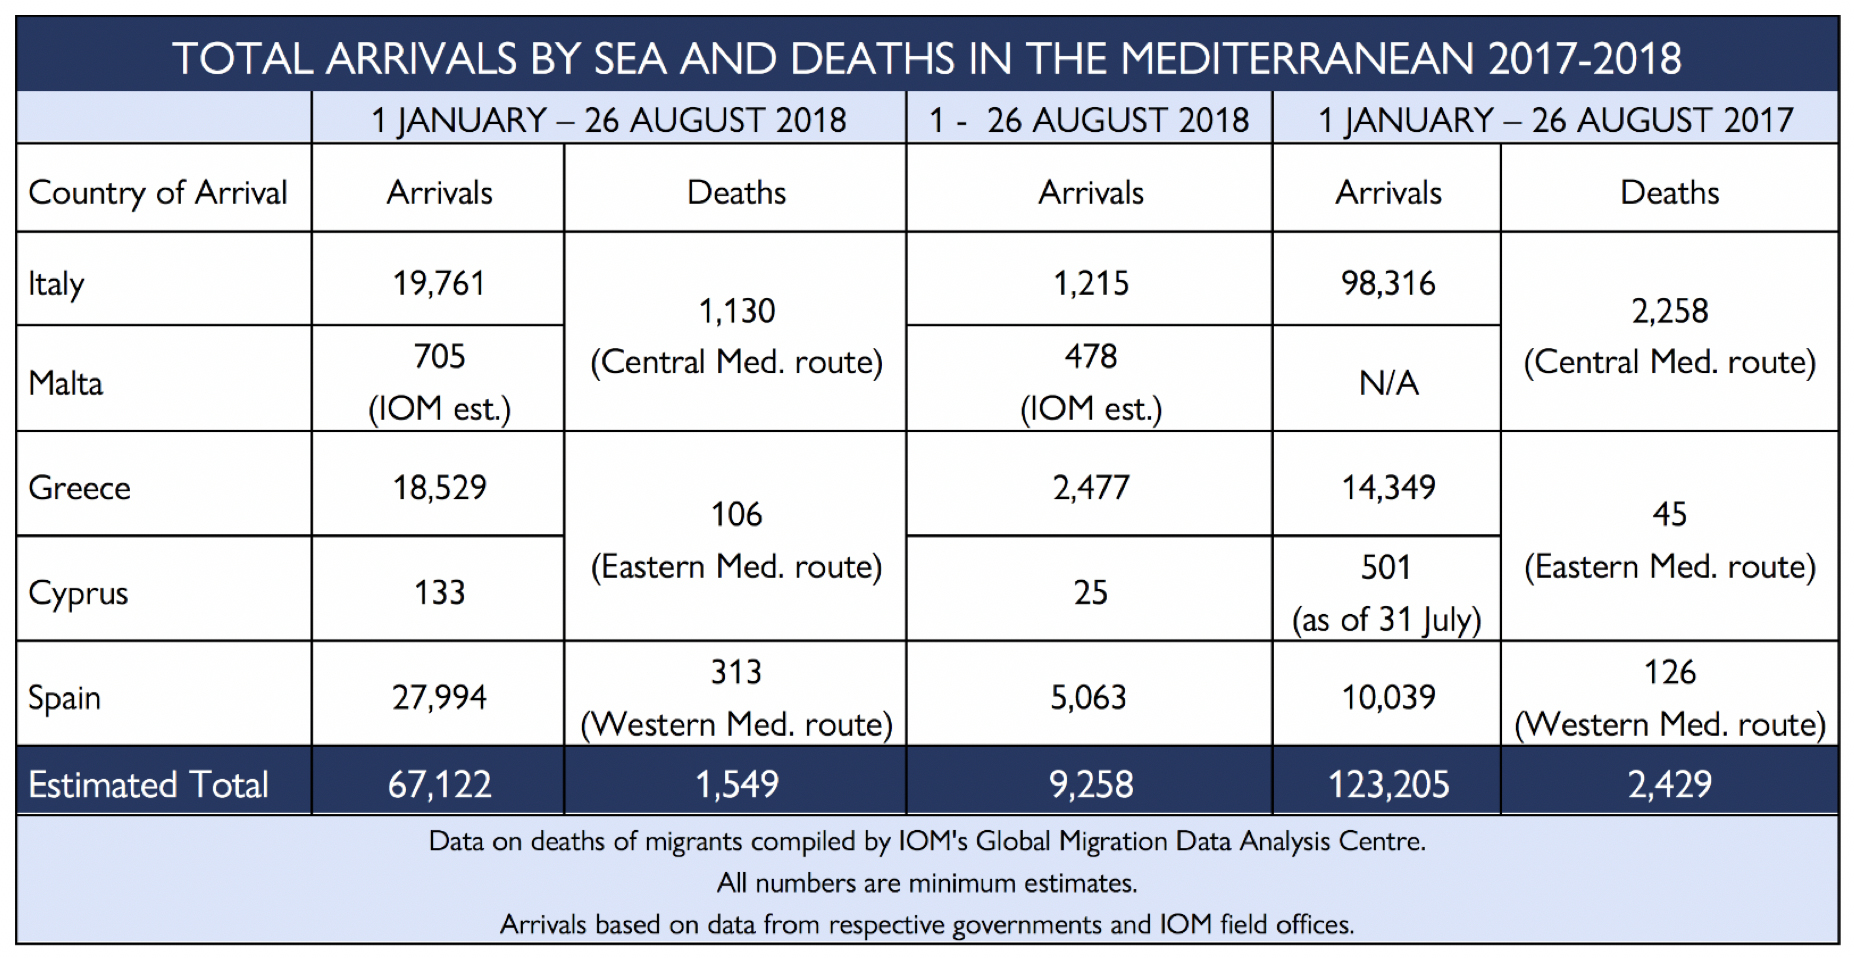 Total arrivals by sea and deaths in the Mediterranean 2017-2018 